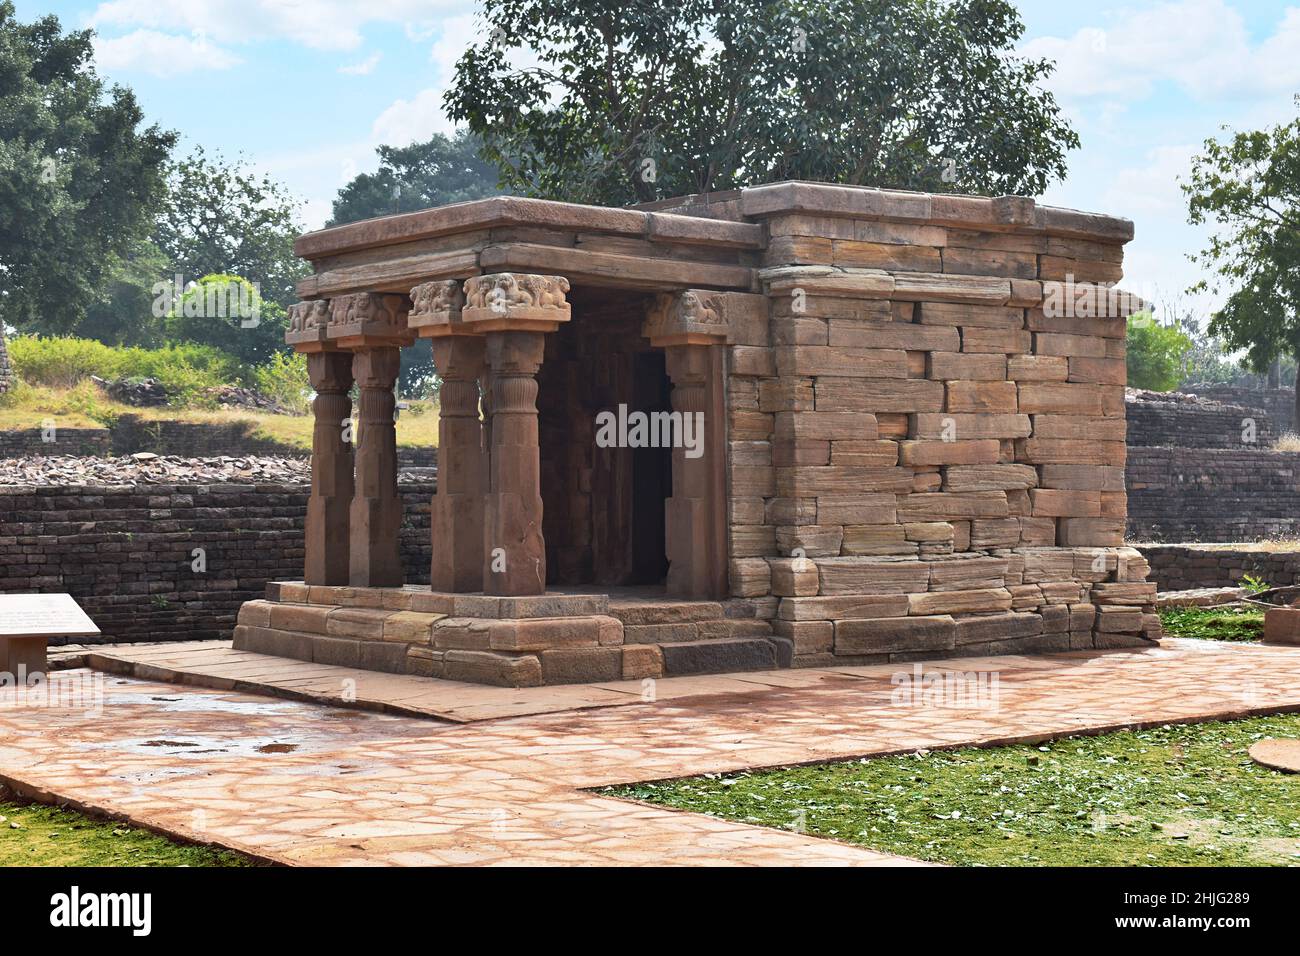 View from Left of  Temple 17 an ancient Buddhist monument at Sanchi, Sanchi monuments, World Heritage Site, Madhya Pradesh, India. Stock Photo